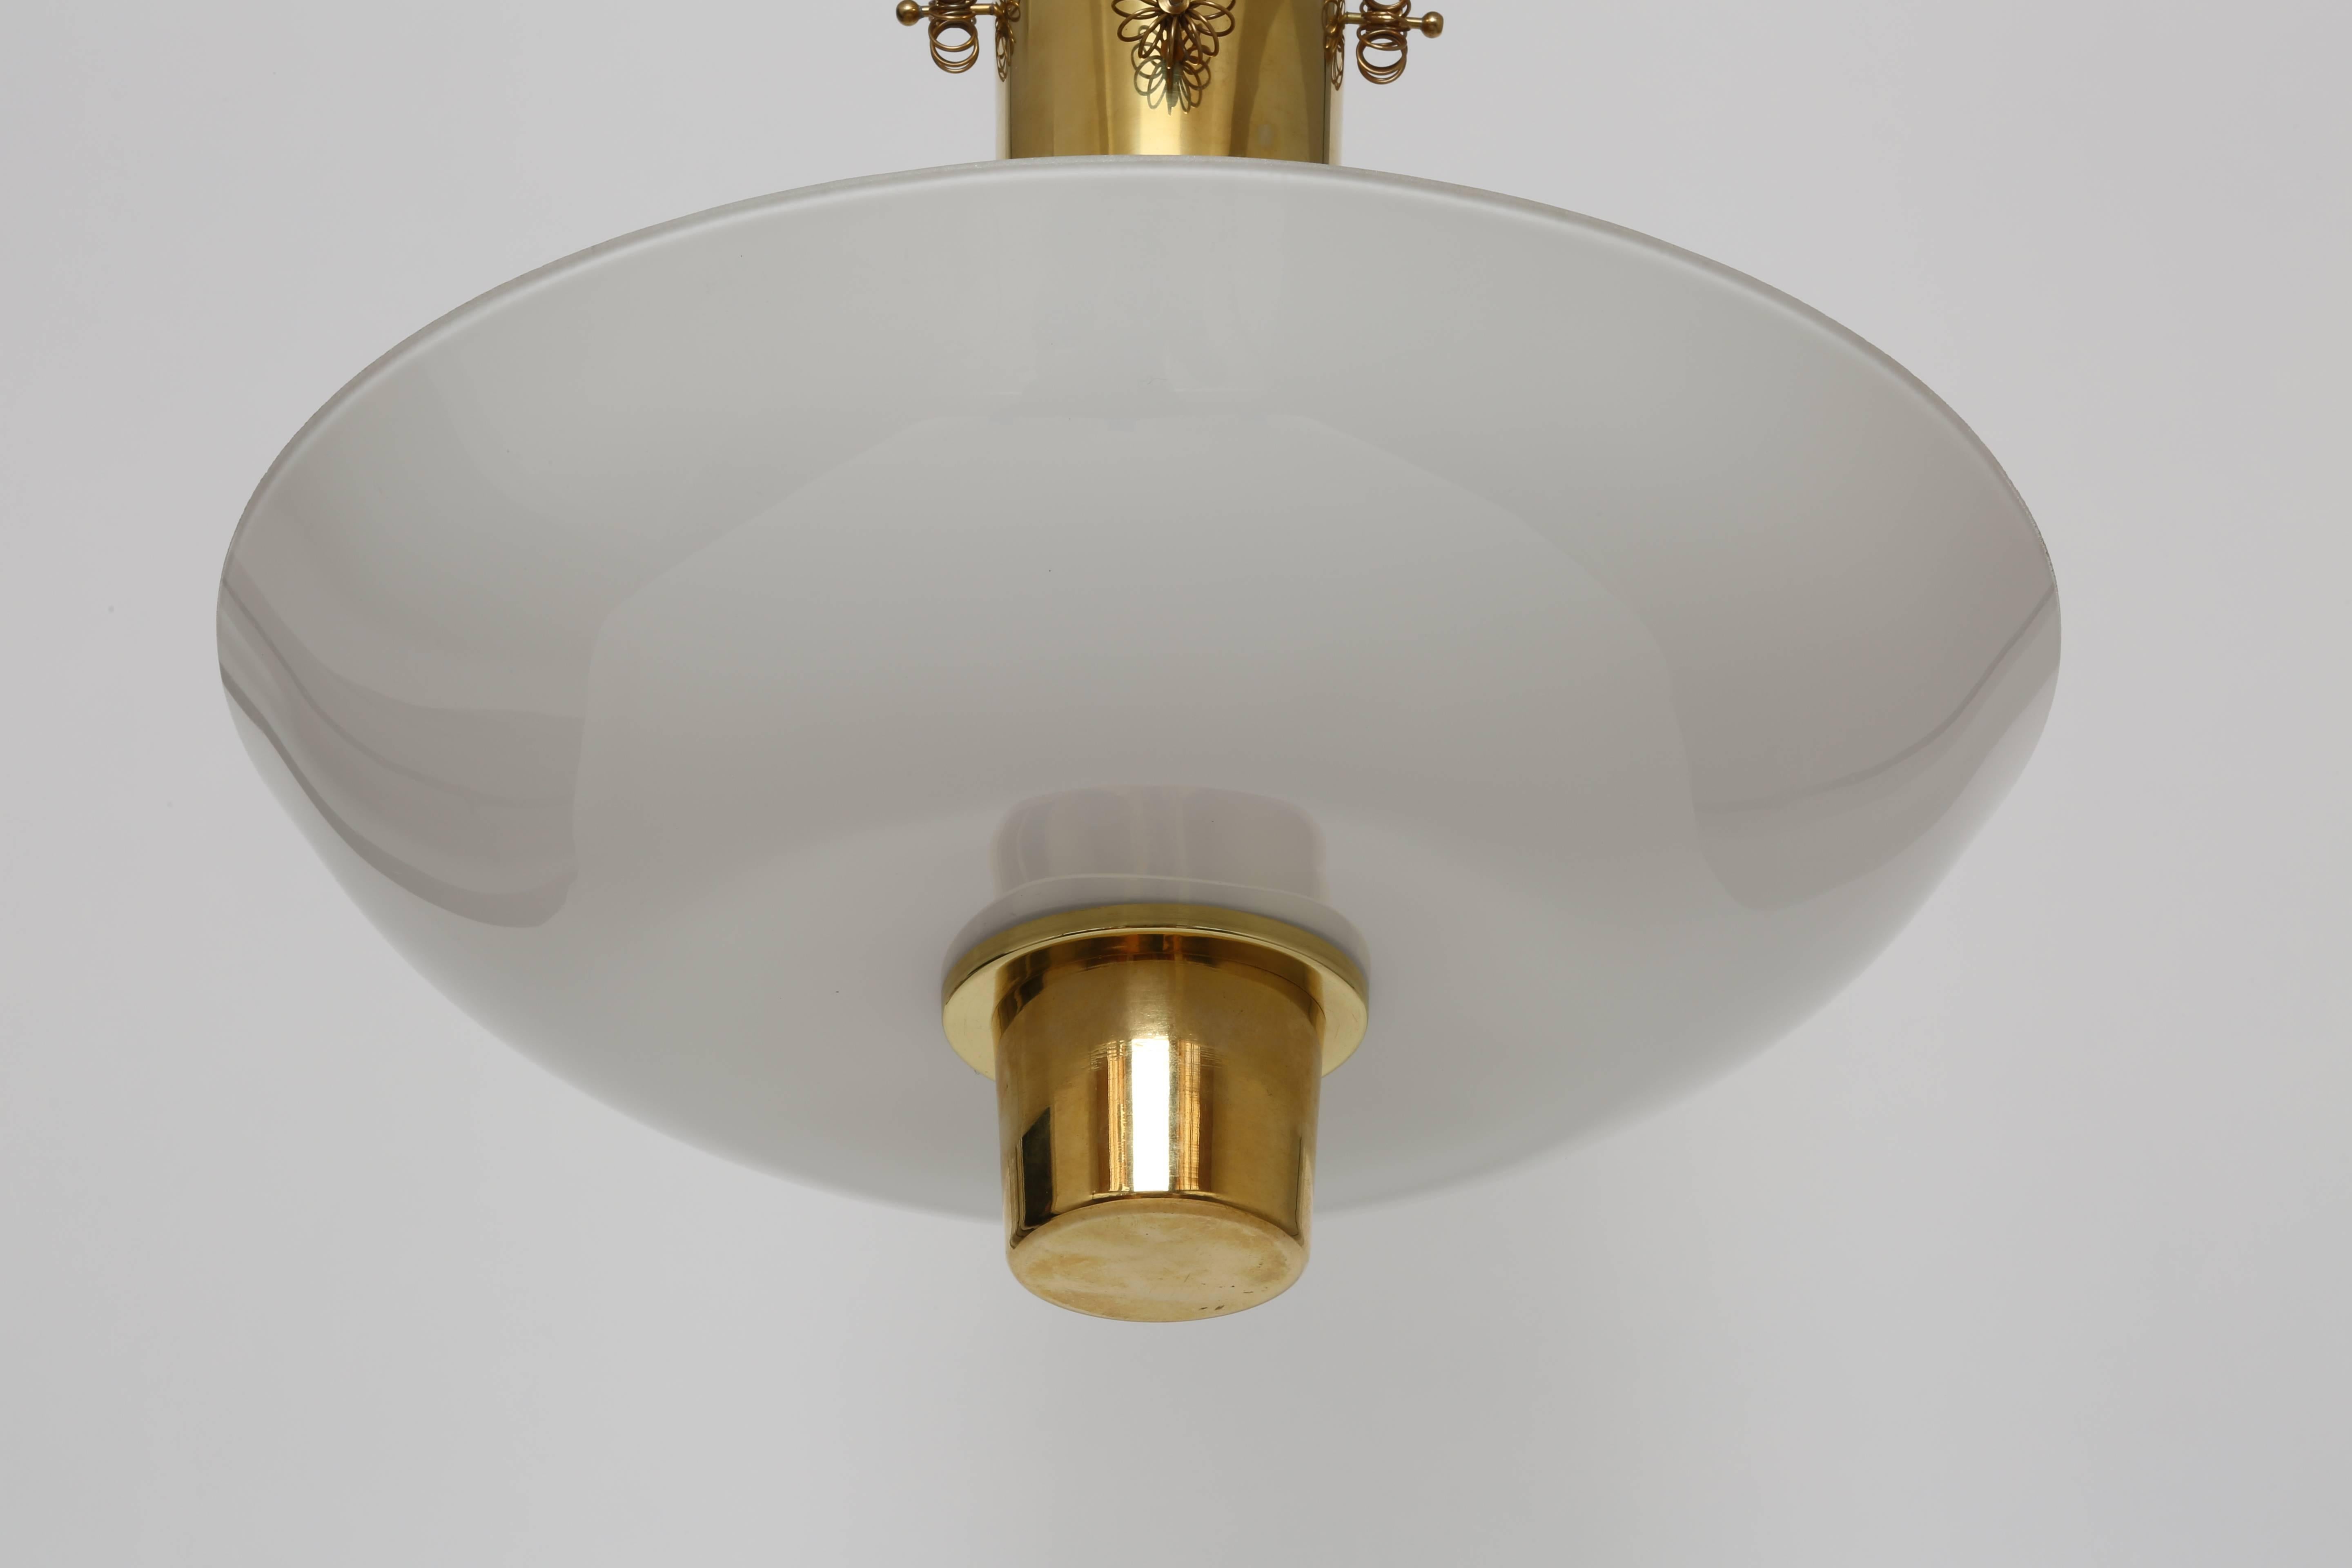 Scandinavian Modern Paavo Tynell ceiling fixture by Taito Oy